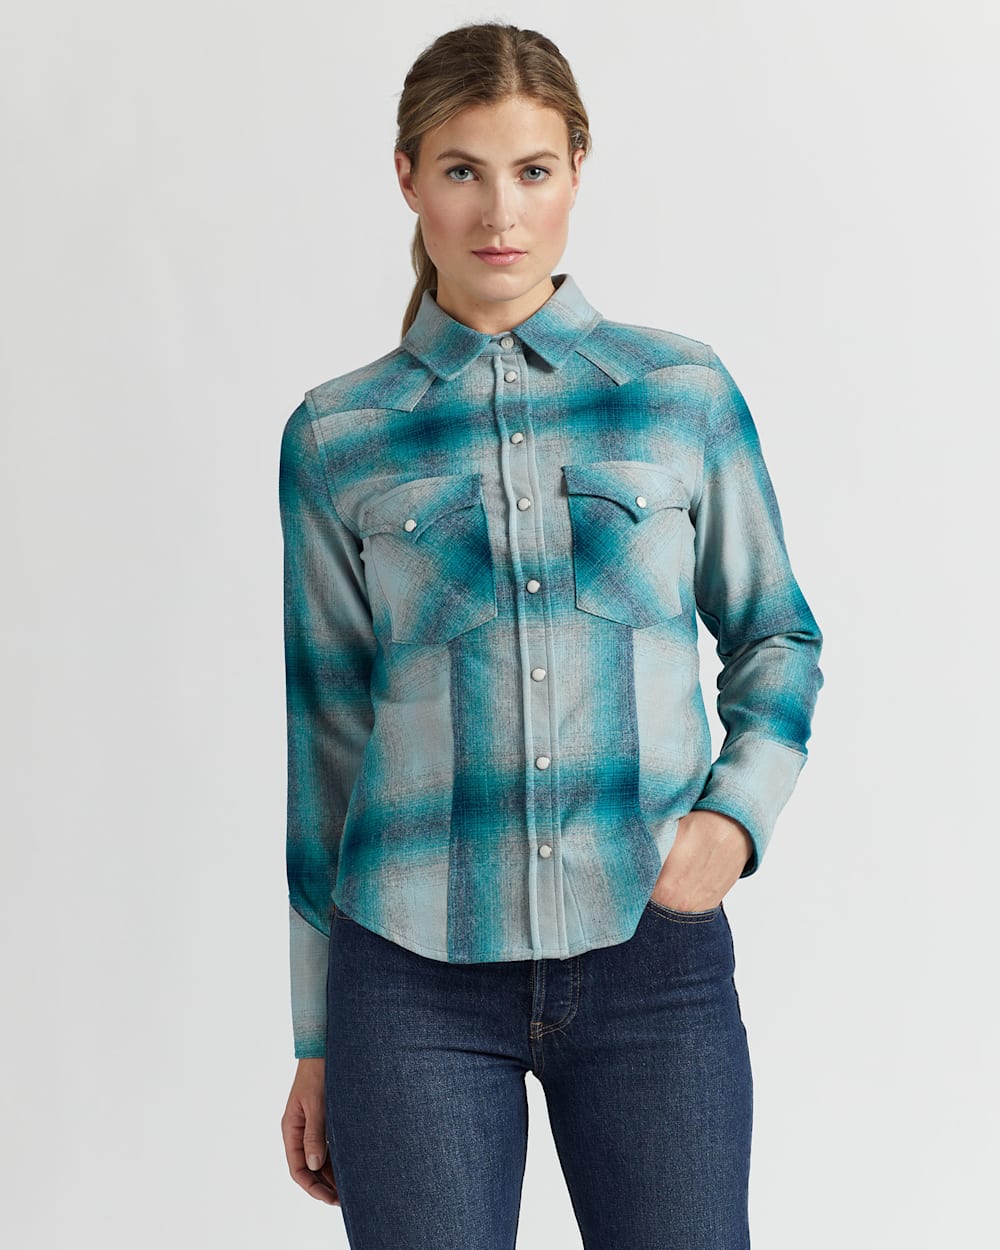 ALTERNATE VIEW OF WOMEN'S SNAP-FRONT CANYON SHIRT IN TURQUOISE/GREY OMBRE image number 6